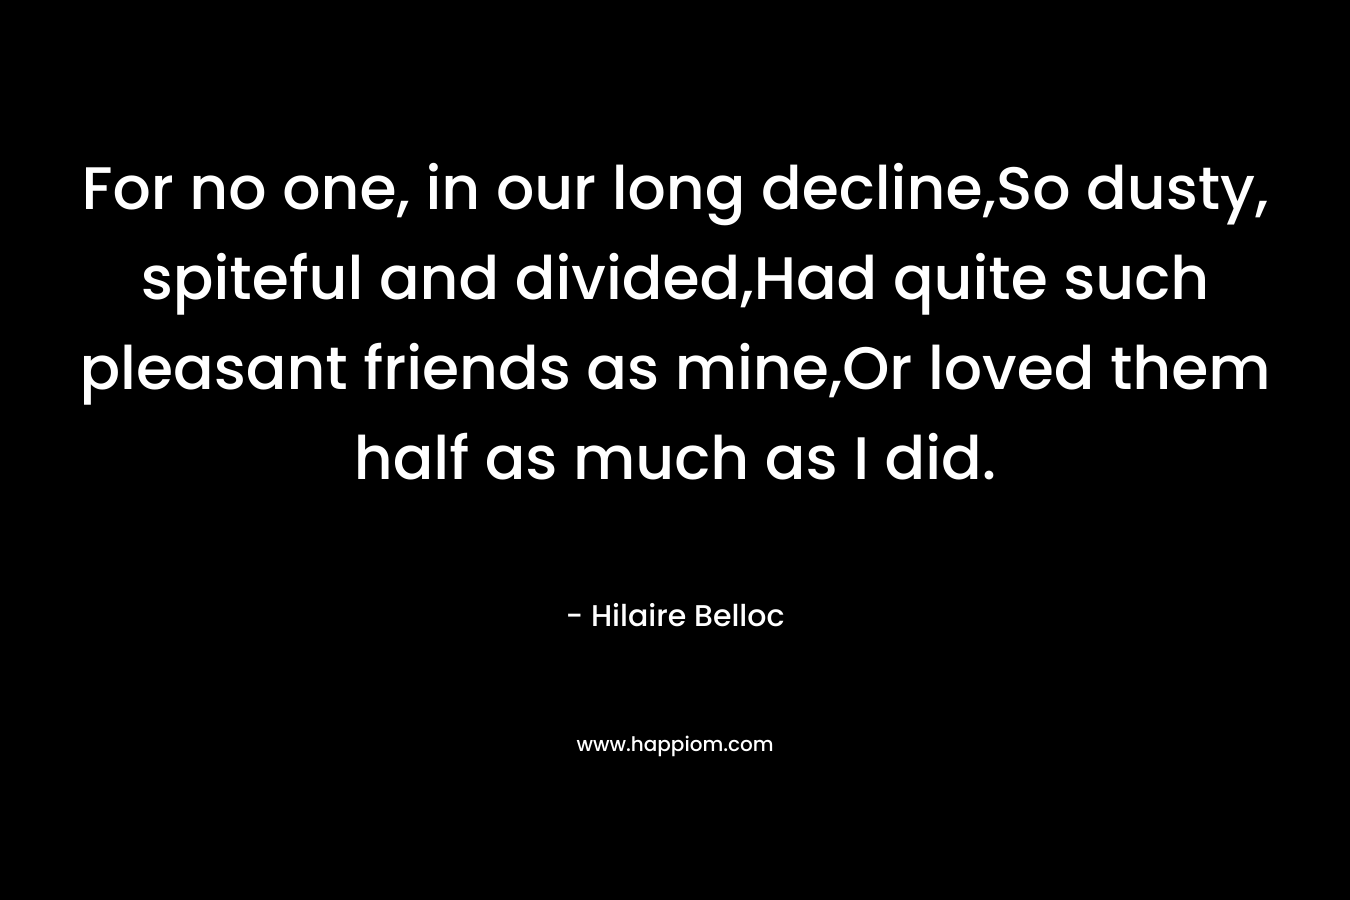 For no one, in our long decline,So dusty, spiteful and divided,Had quite such pleasant friends as mine,Or loved them half as much as I did. – Hilaire Belloc